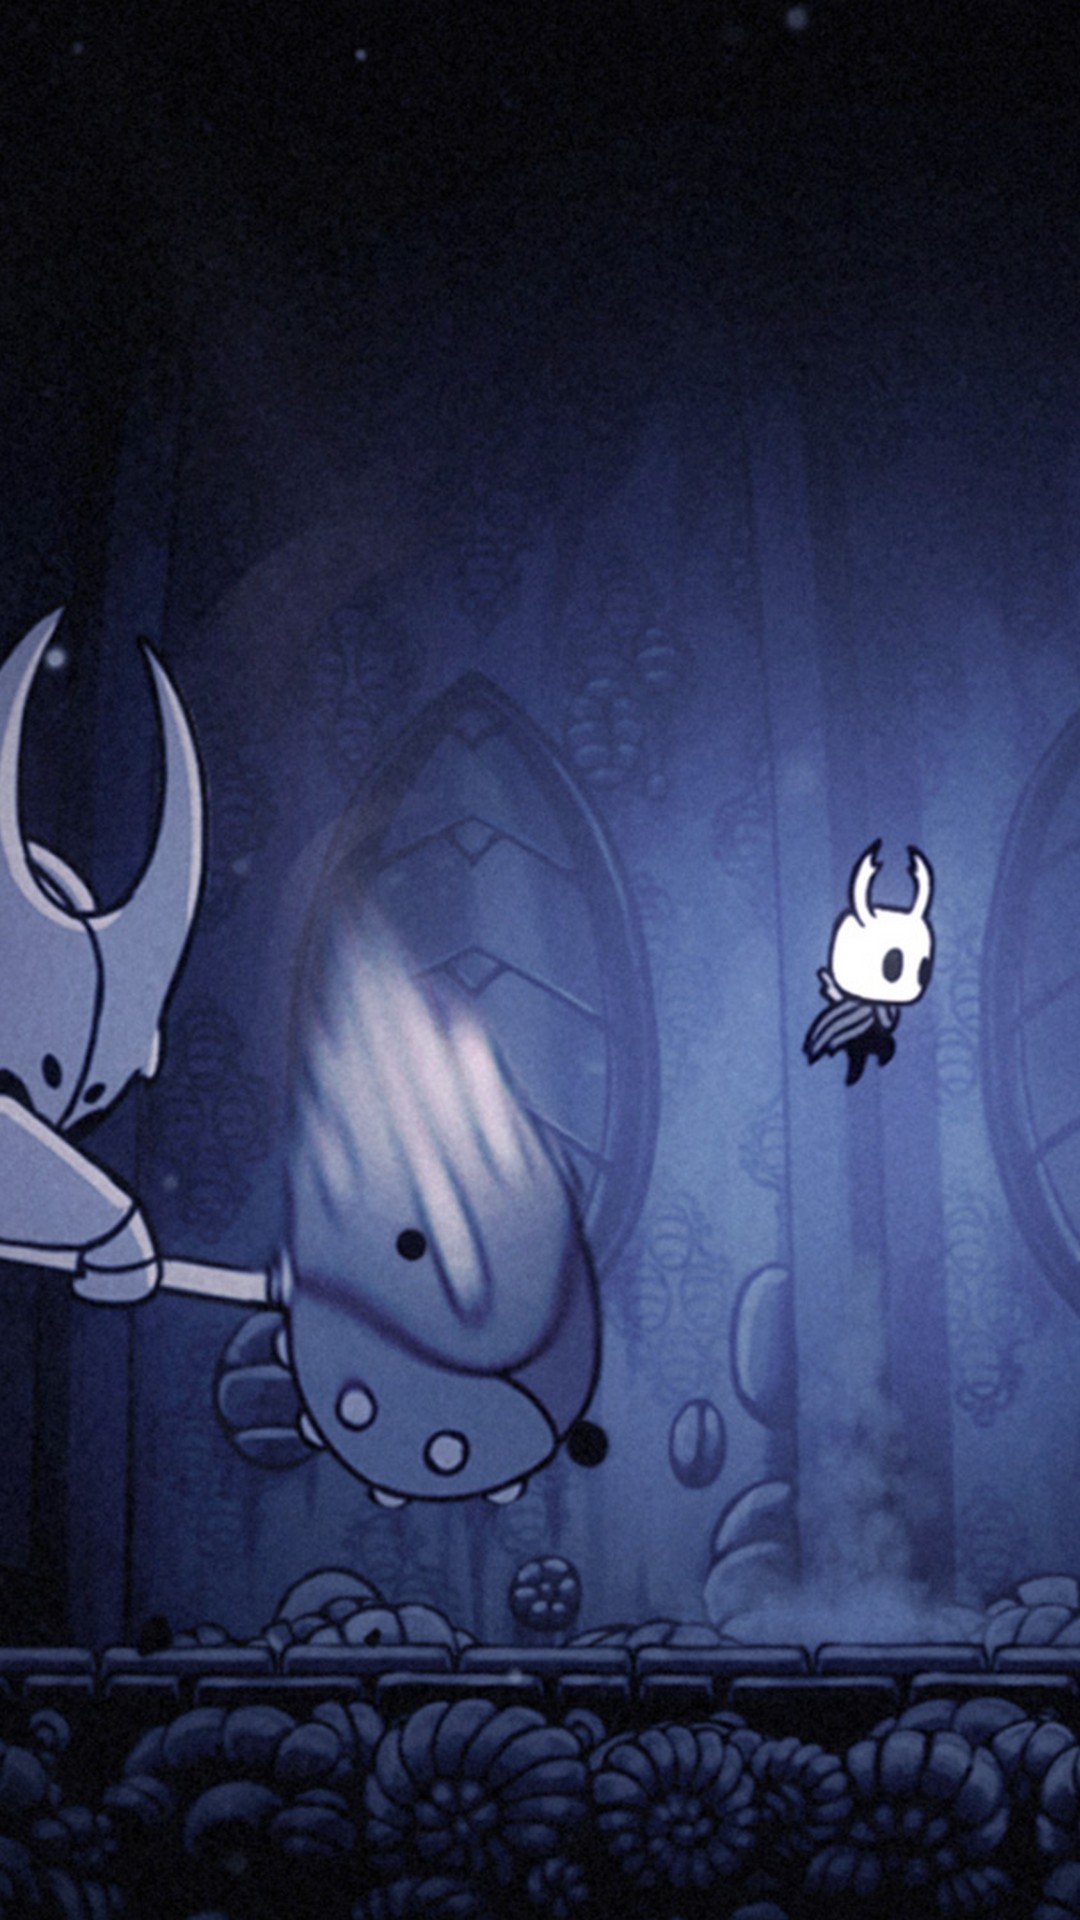 Hollow Knight iPhone Wallpaper Lock Screen With high-resolution 1080X1920 pixel. You can set as wallpaper for Apple iPhone X, XS Max, XR, 8, 7, 6, SE, iPad. Enjoy and share your favorite HD wallpapers and background images